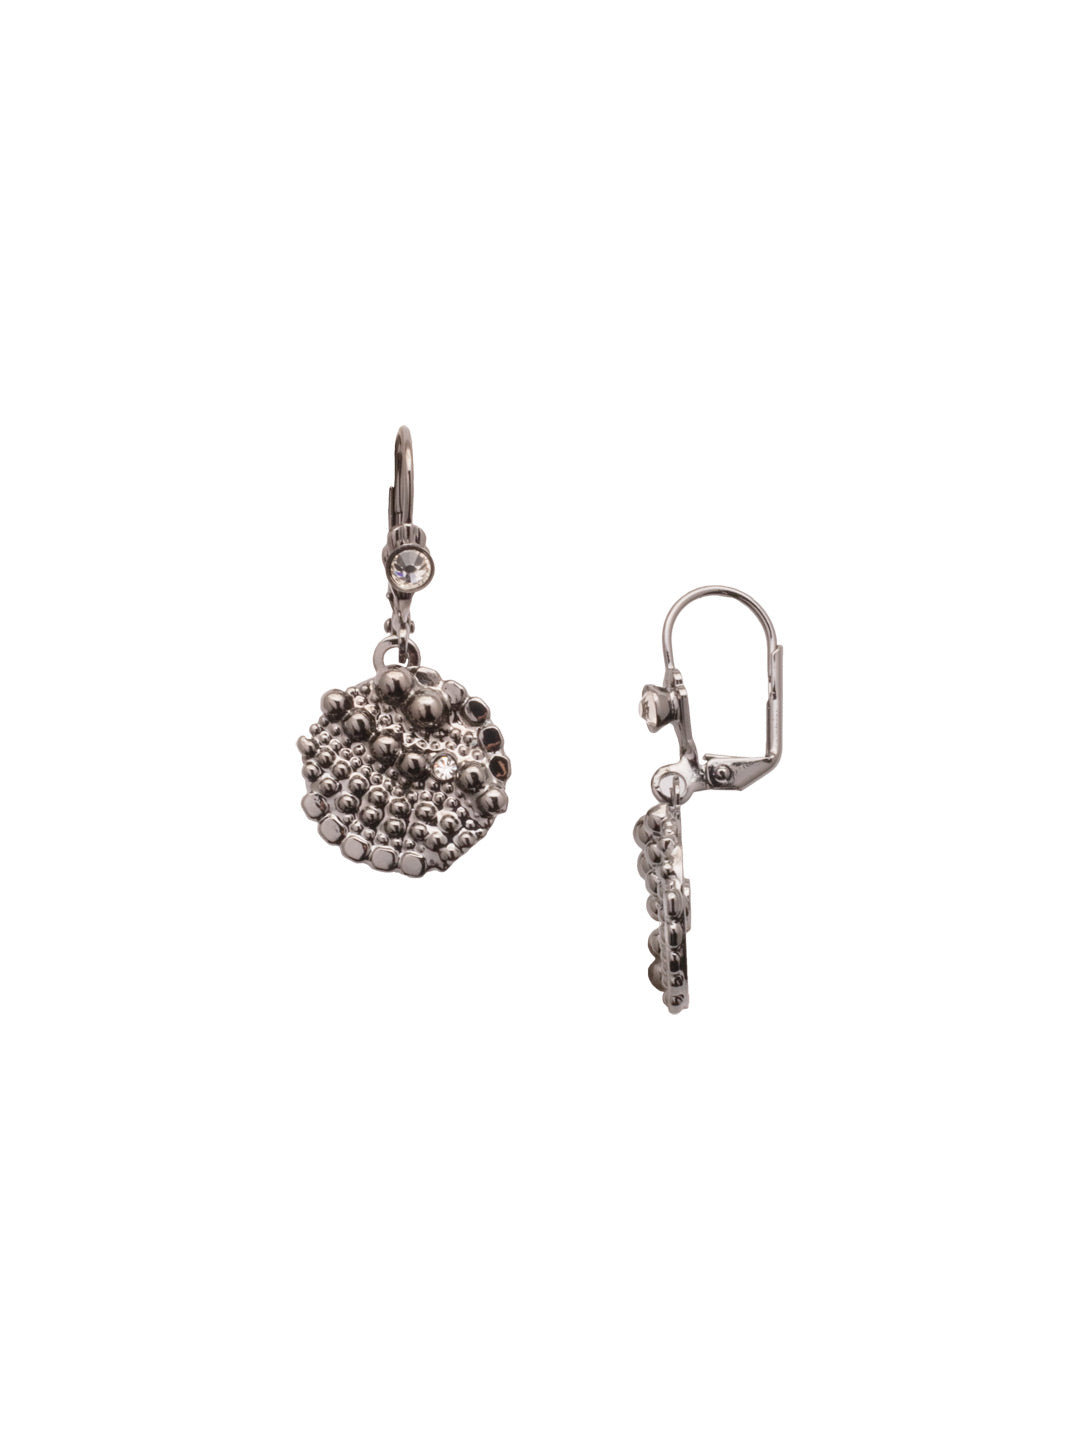 Khaleesi Dangle Earring - 4EFC15GMCRY - <p>The Khaleesi Dangle Earrings feature scale-like detailed metal disks, dangling from a lever back french wire. From Sorrelli's Crystal collection in our Gun Metal finish.</p>